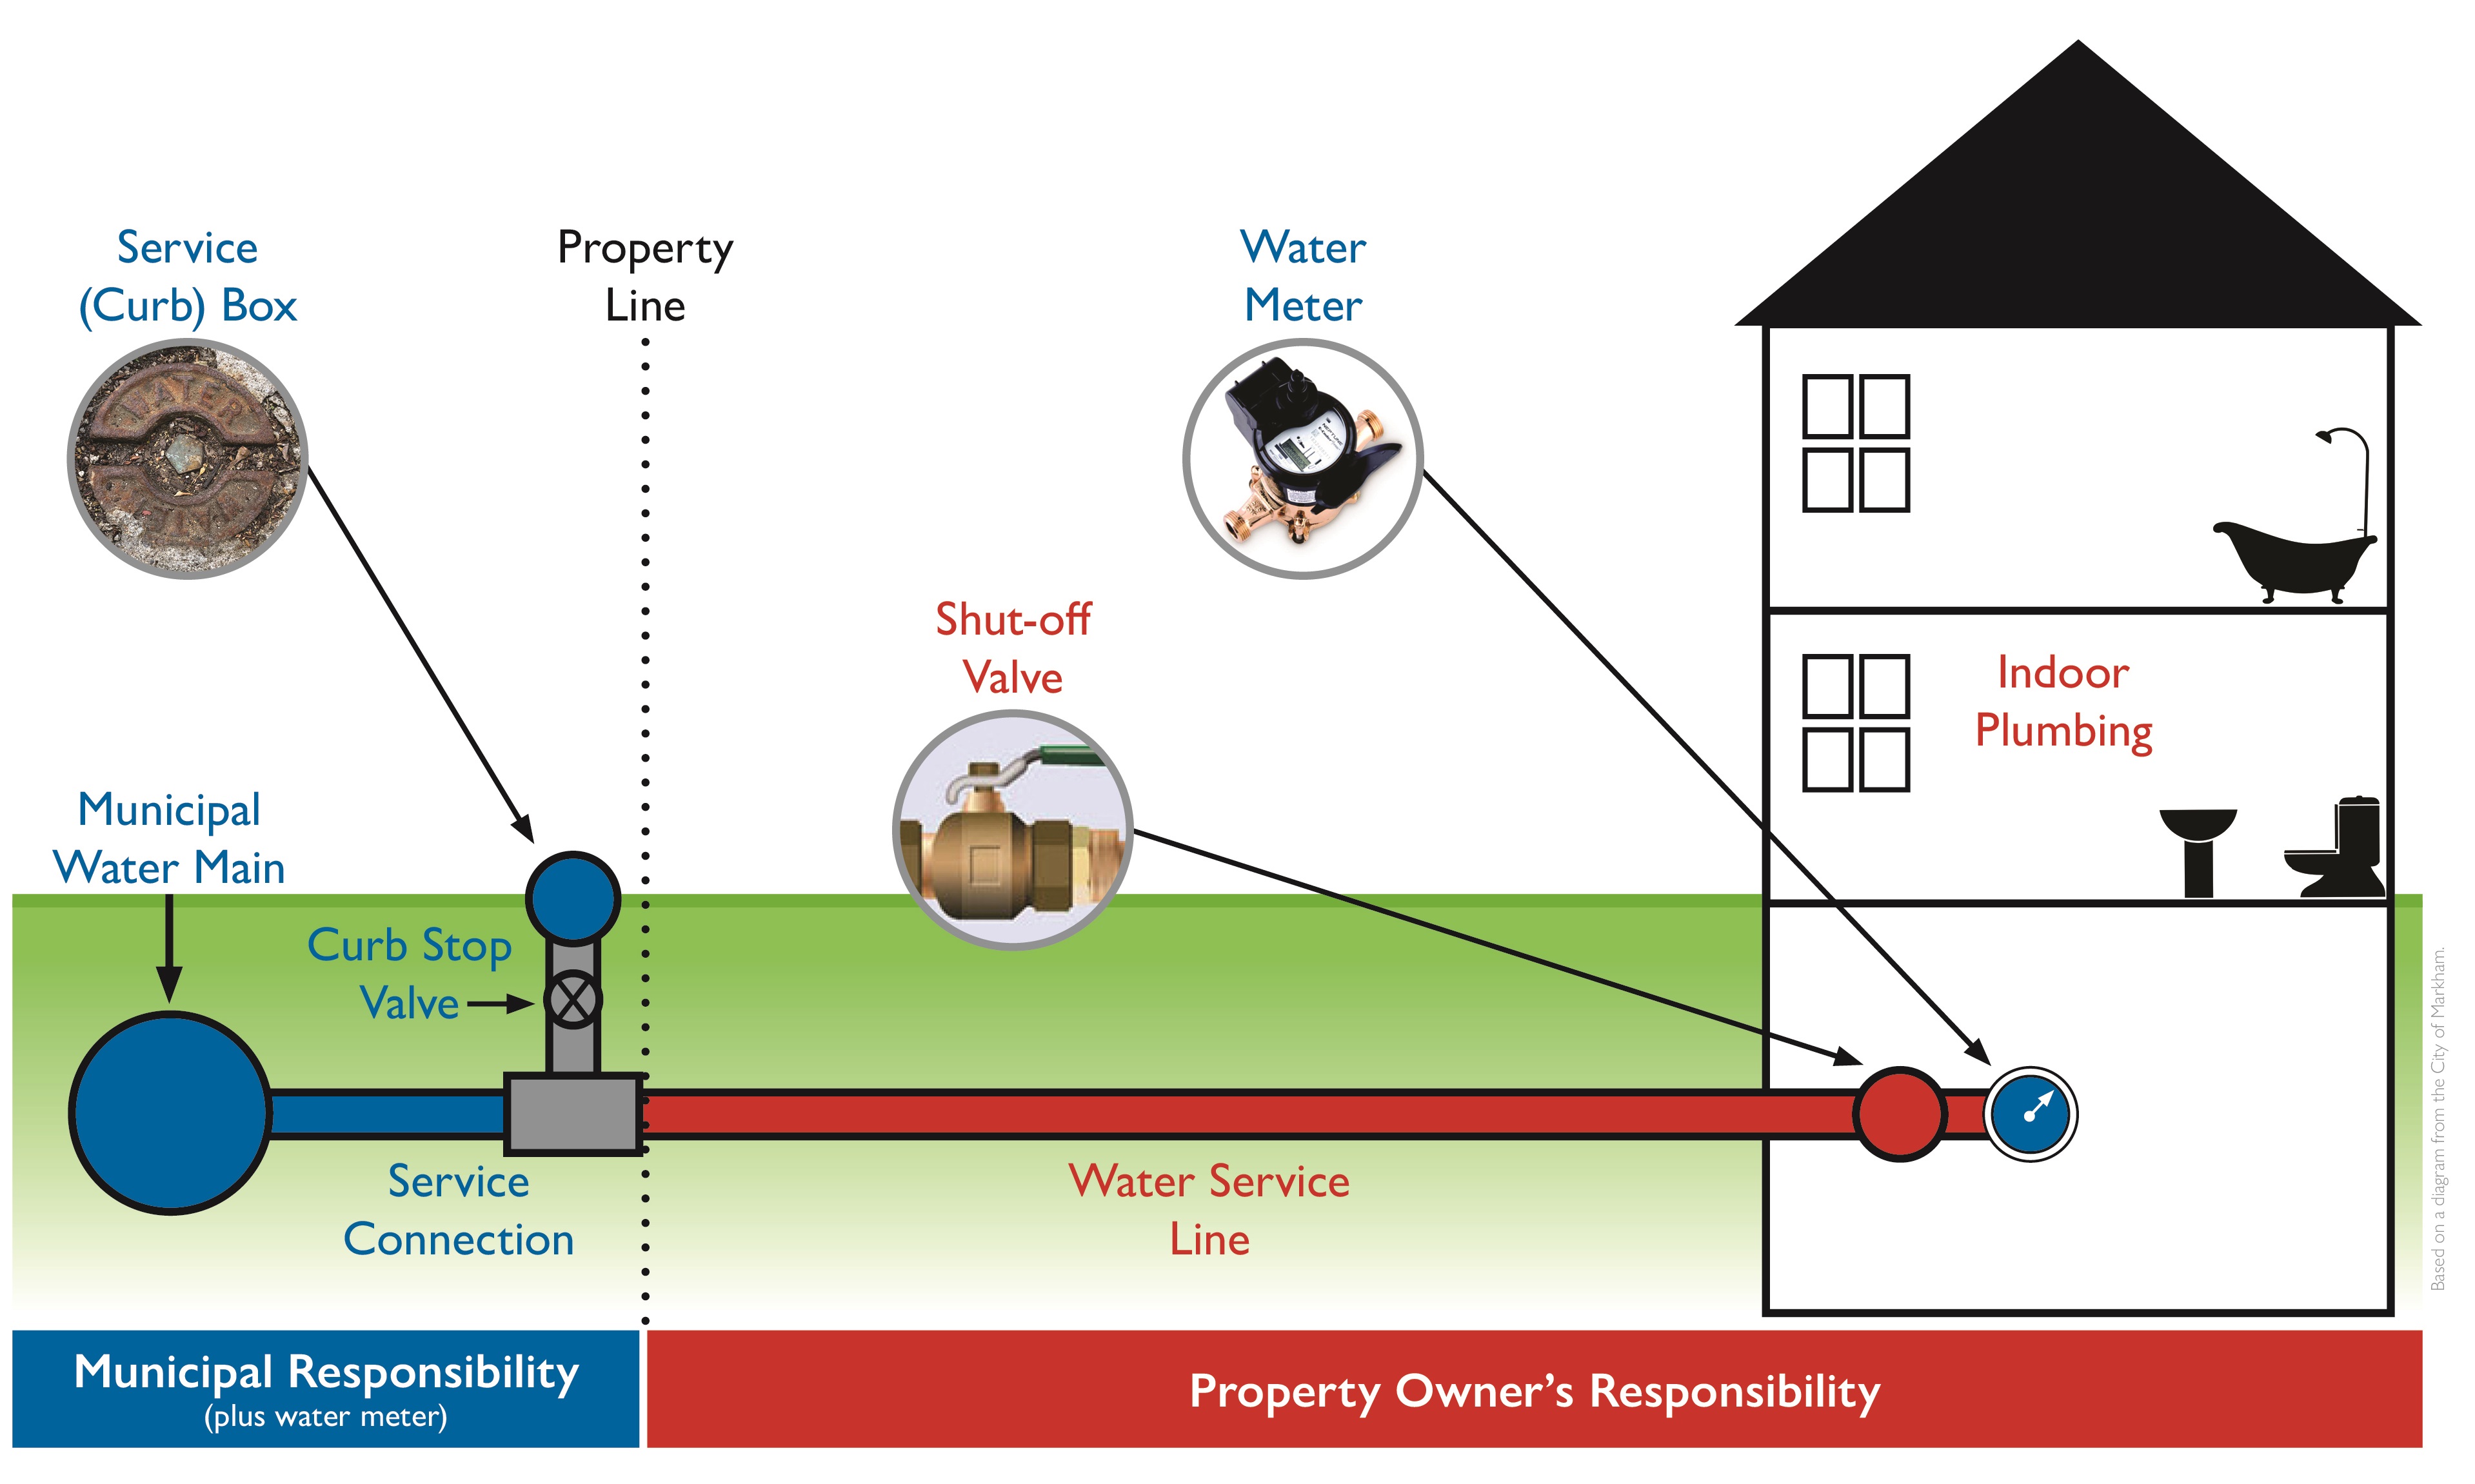 Diagram showing who is responsible for water coming onto a property. Content is conveyed in text that follows.